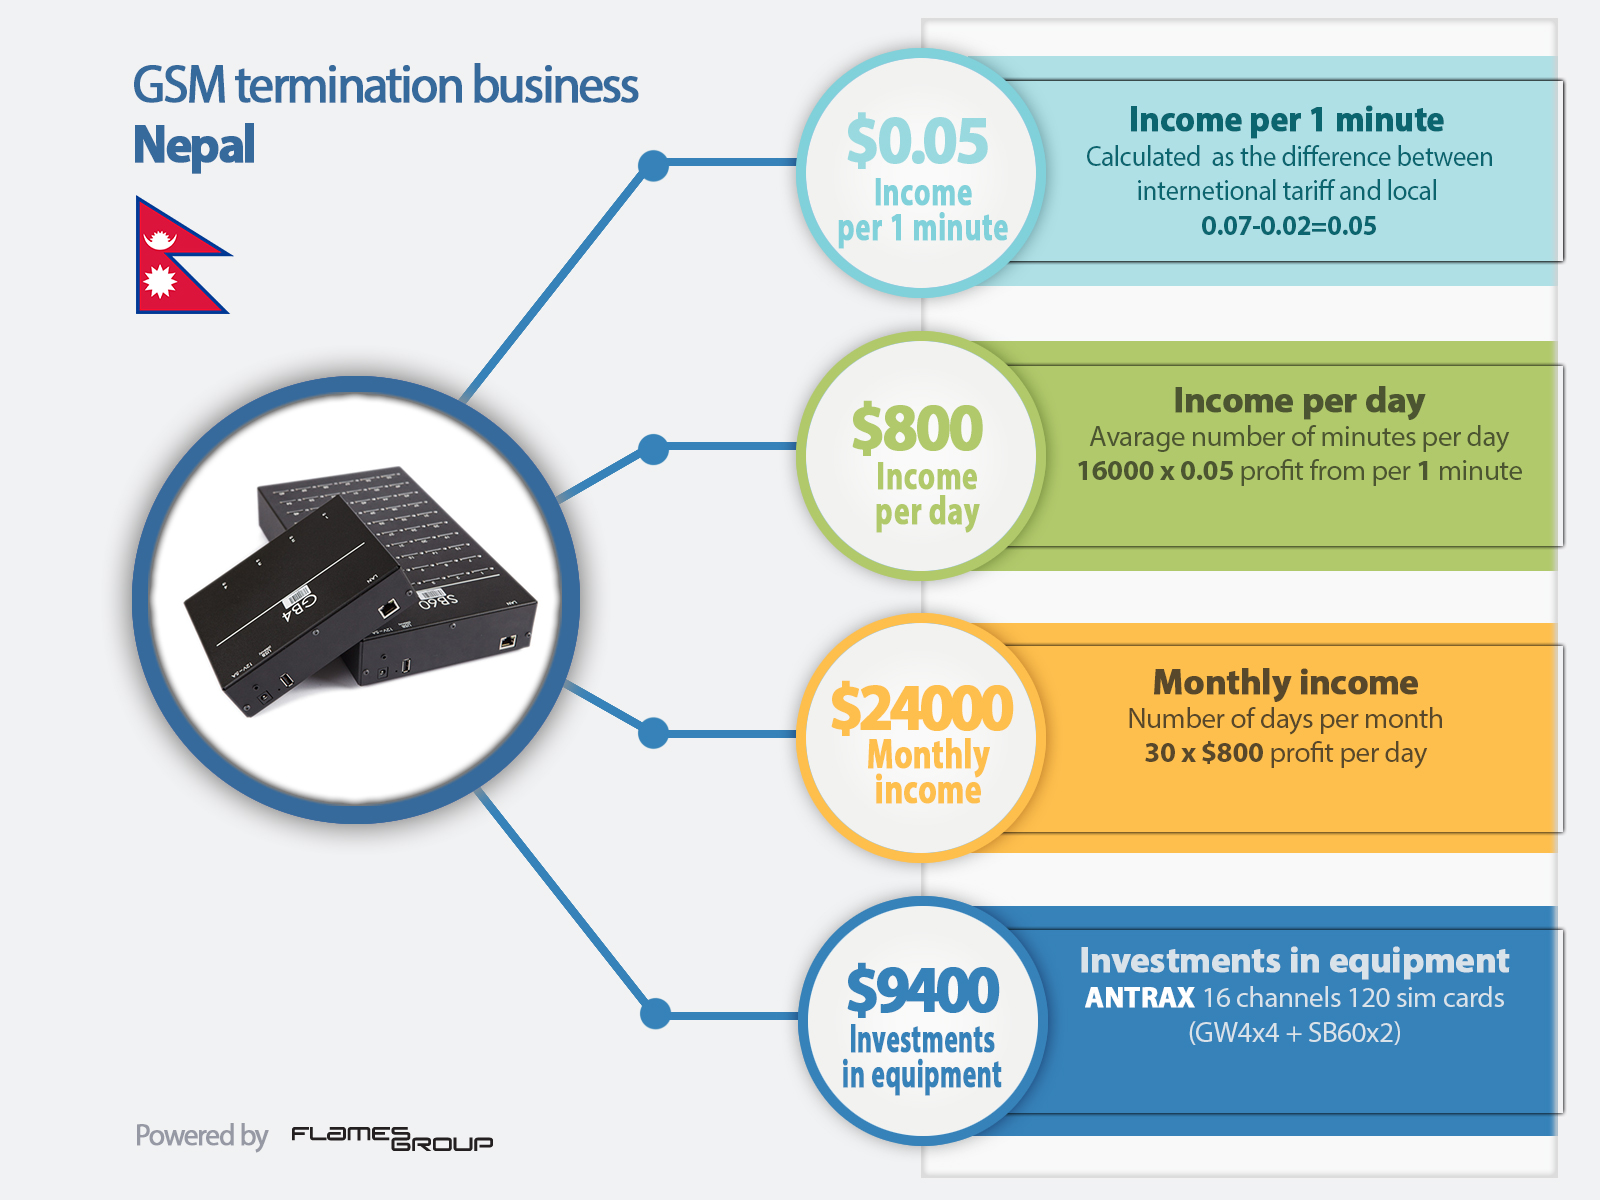 GSM termination in Nepal - Infographic ANTRAX